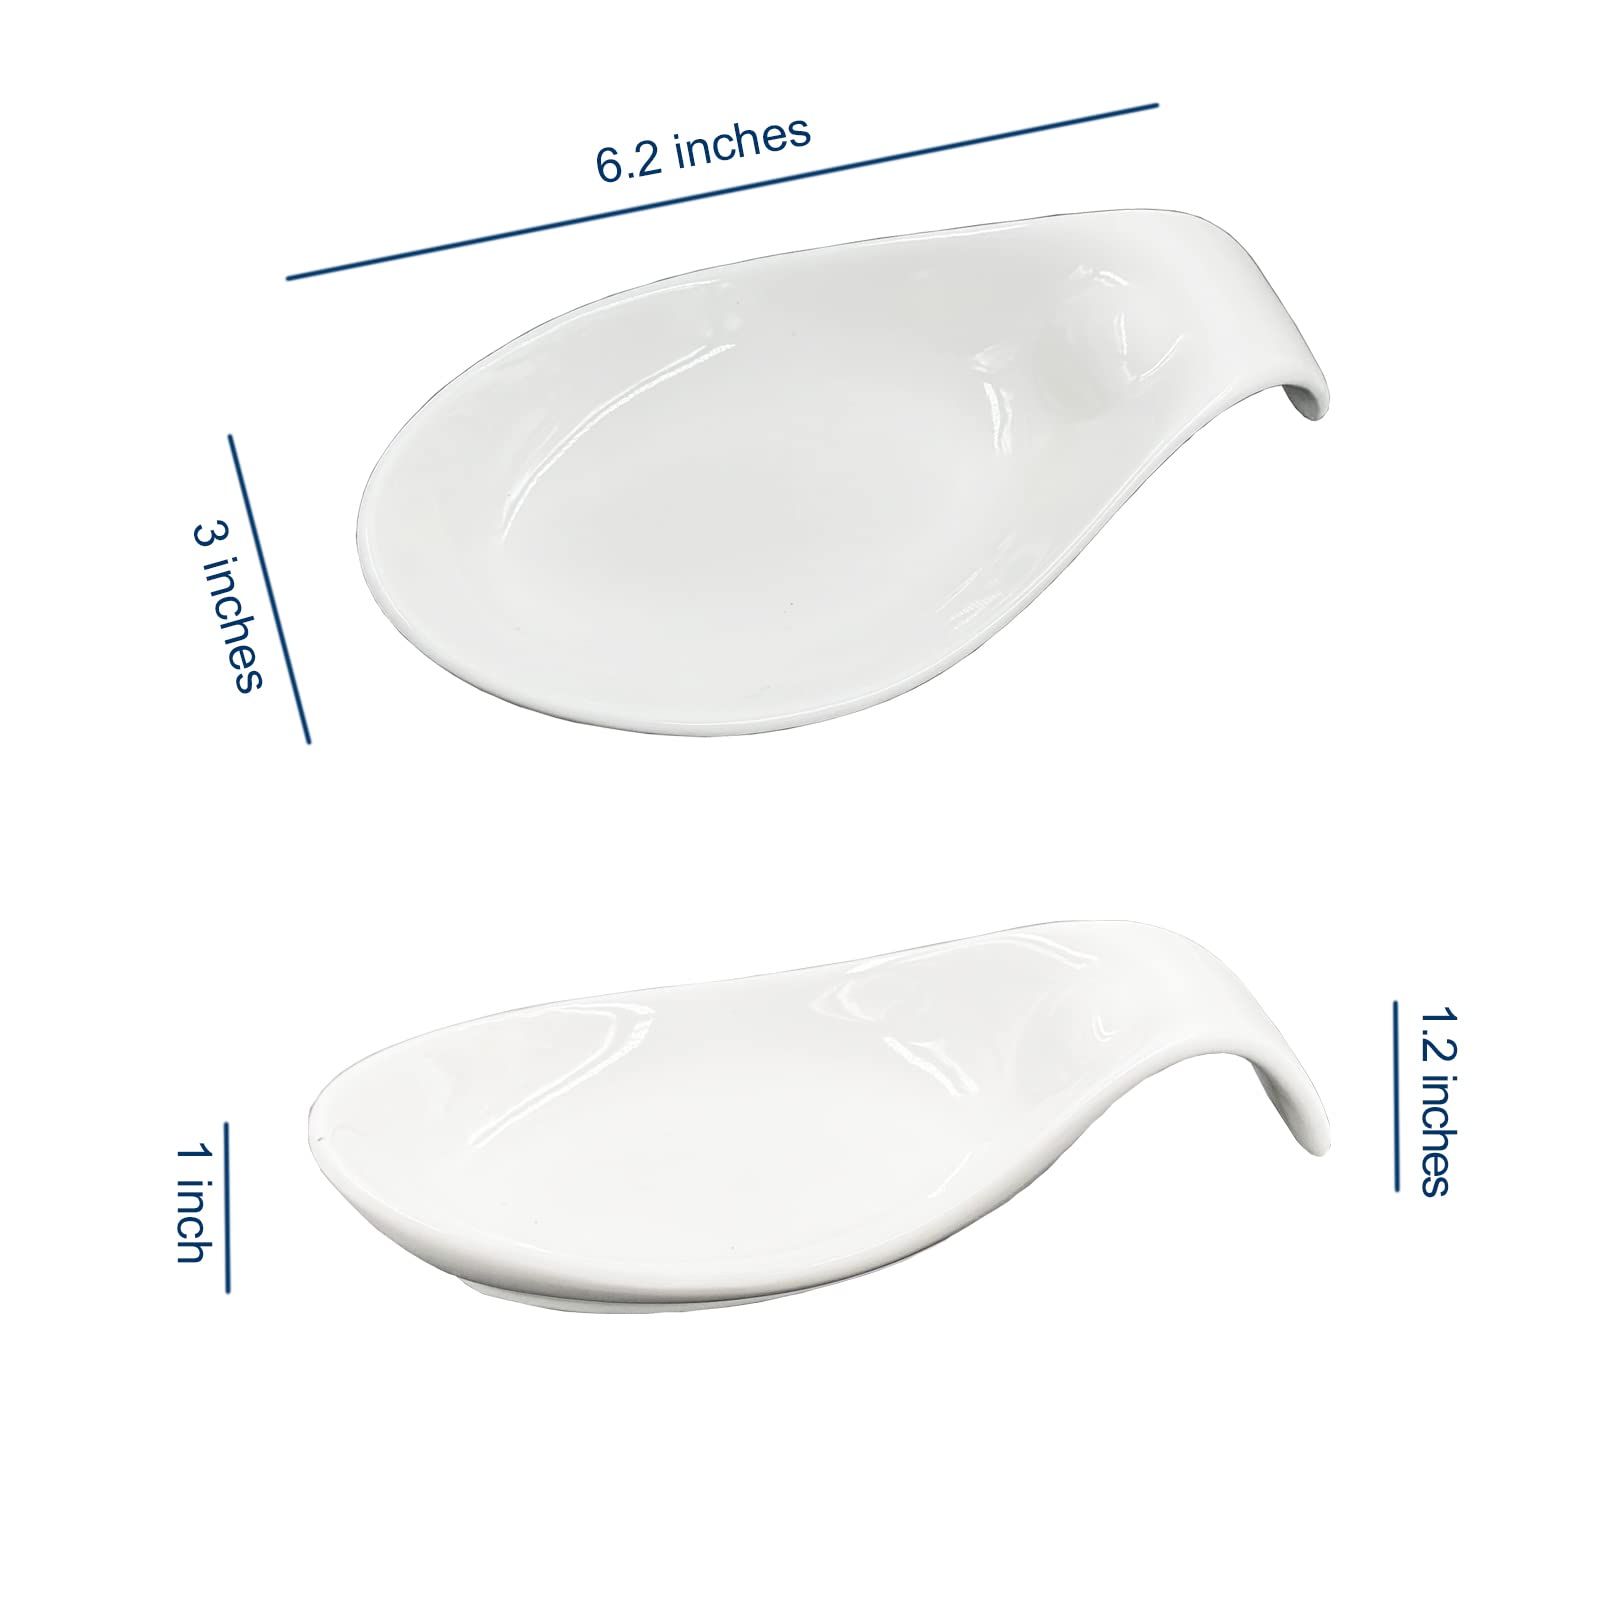 Spoon Rest Set of 2 for Kitchen Counter White Ceramic Spoon Holder for Stove Top Sauce Dish, 6.2 Inches